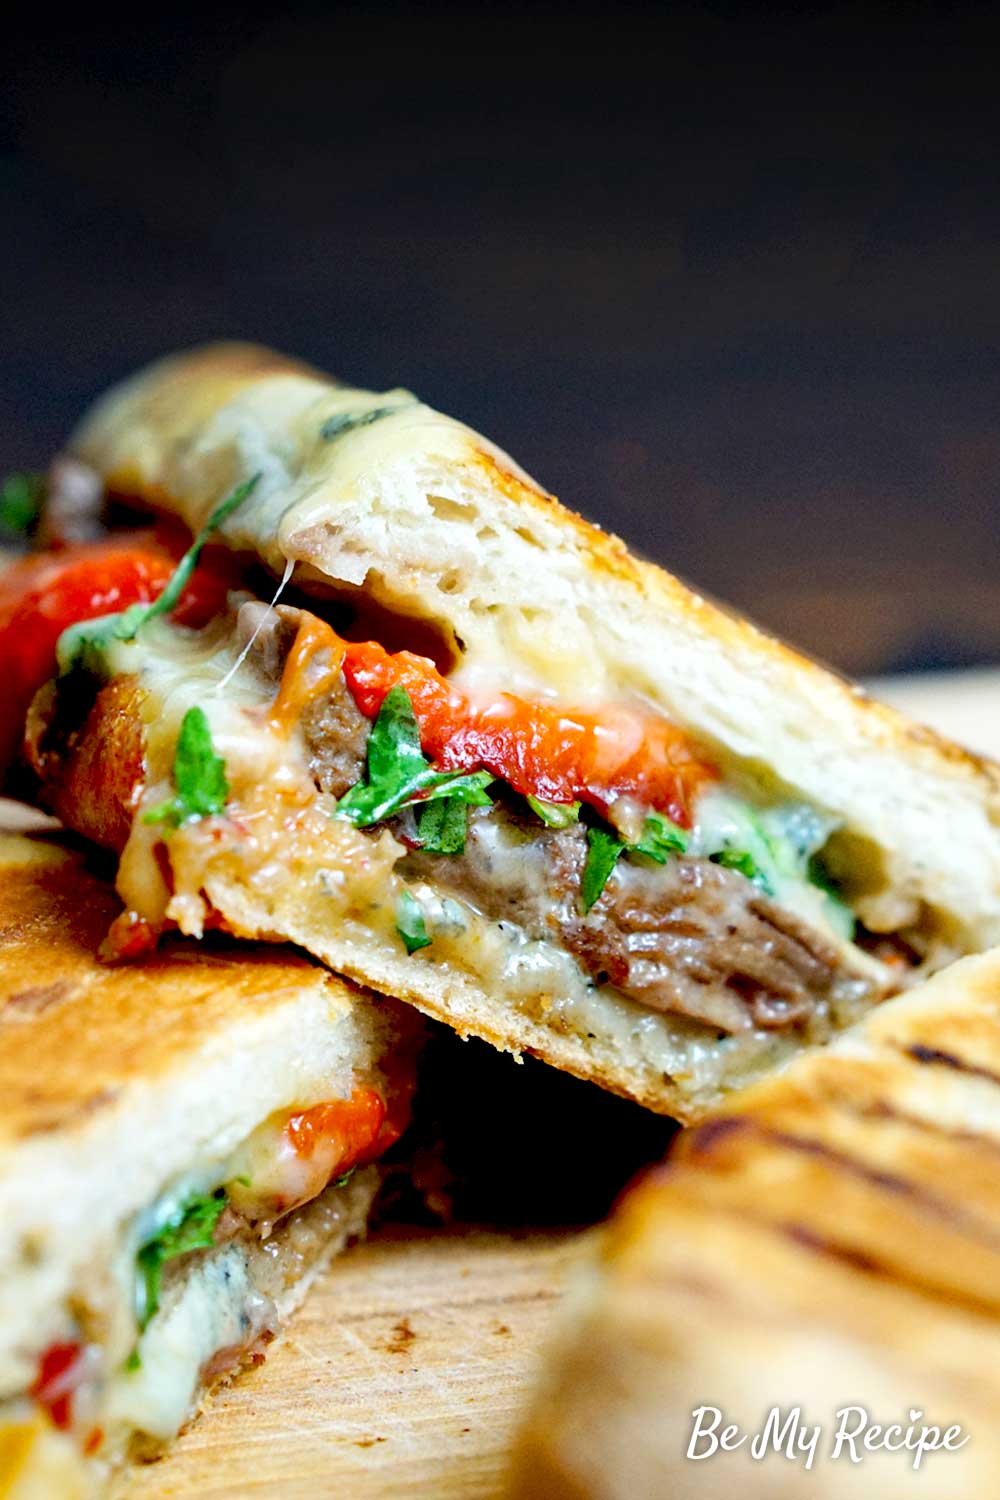 Juicy Steak Panini Recipe with Blue Cheese and Roasted Bell Pepper